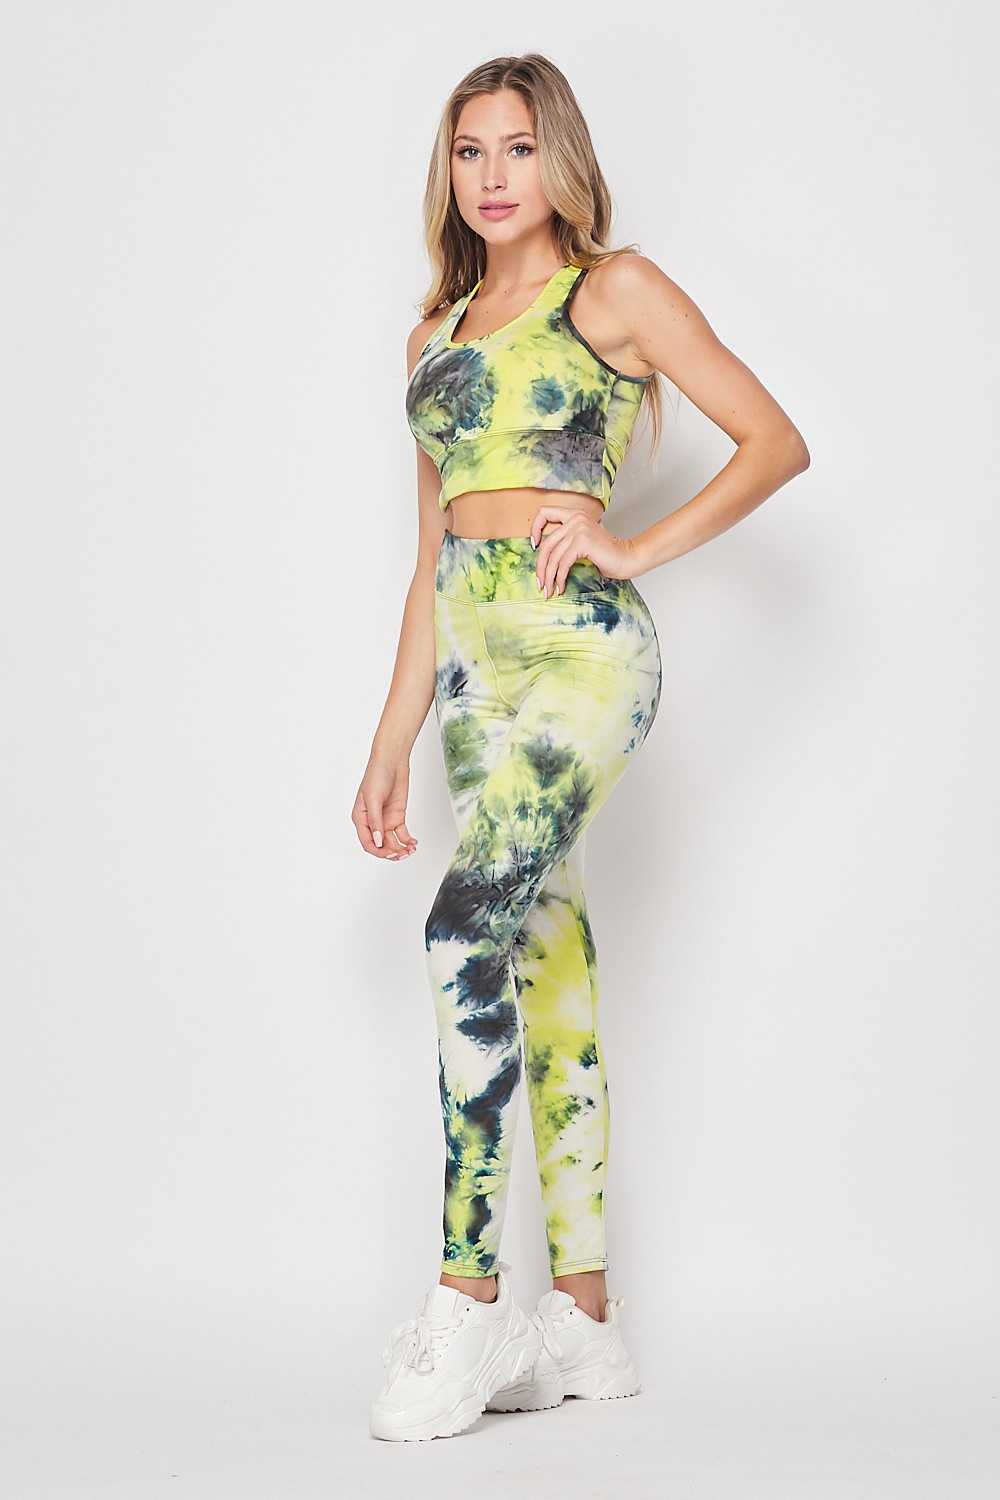 Wholesale Tie Dye 2 Piece High Waisted Leggings and Bra Top Set